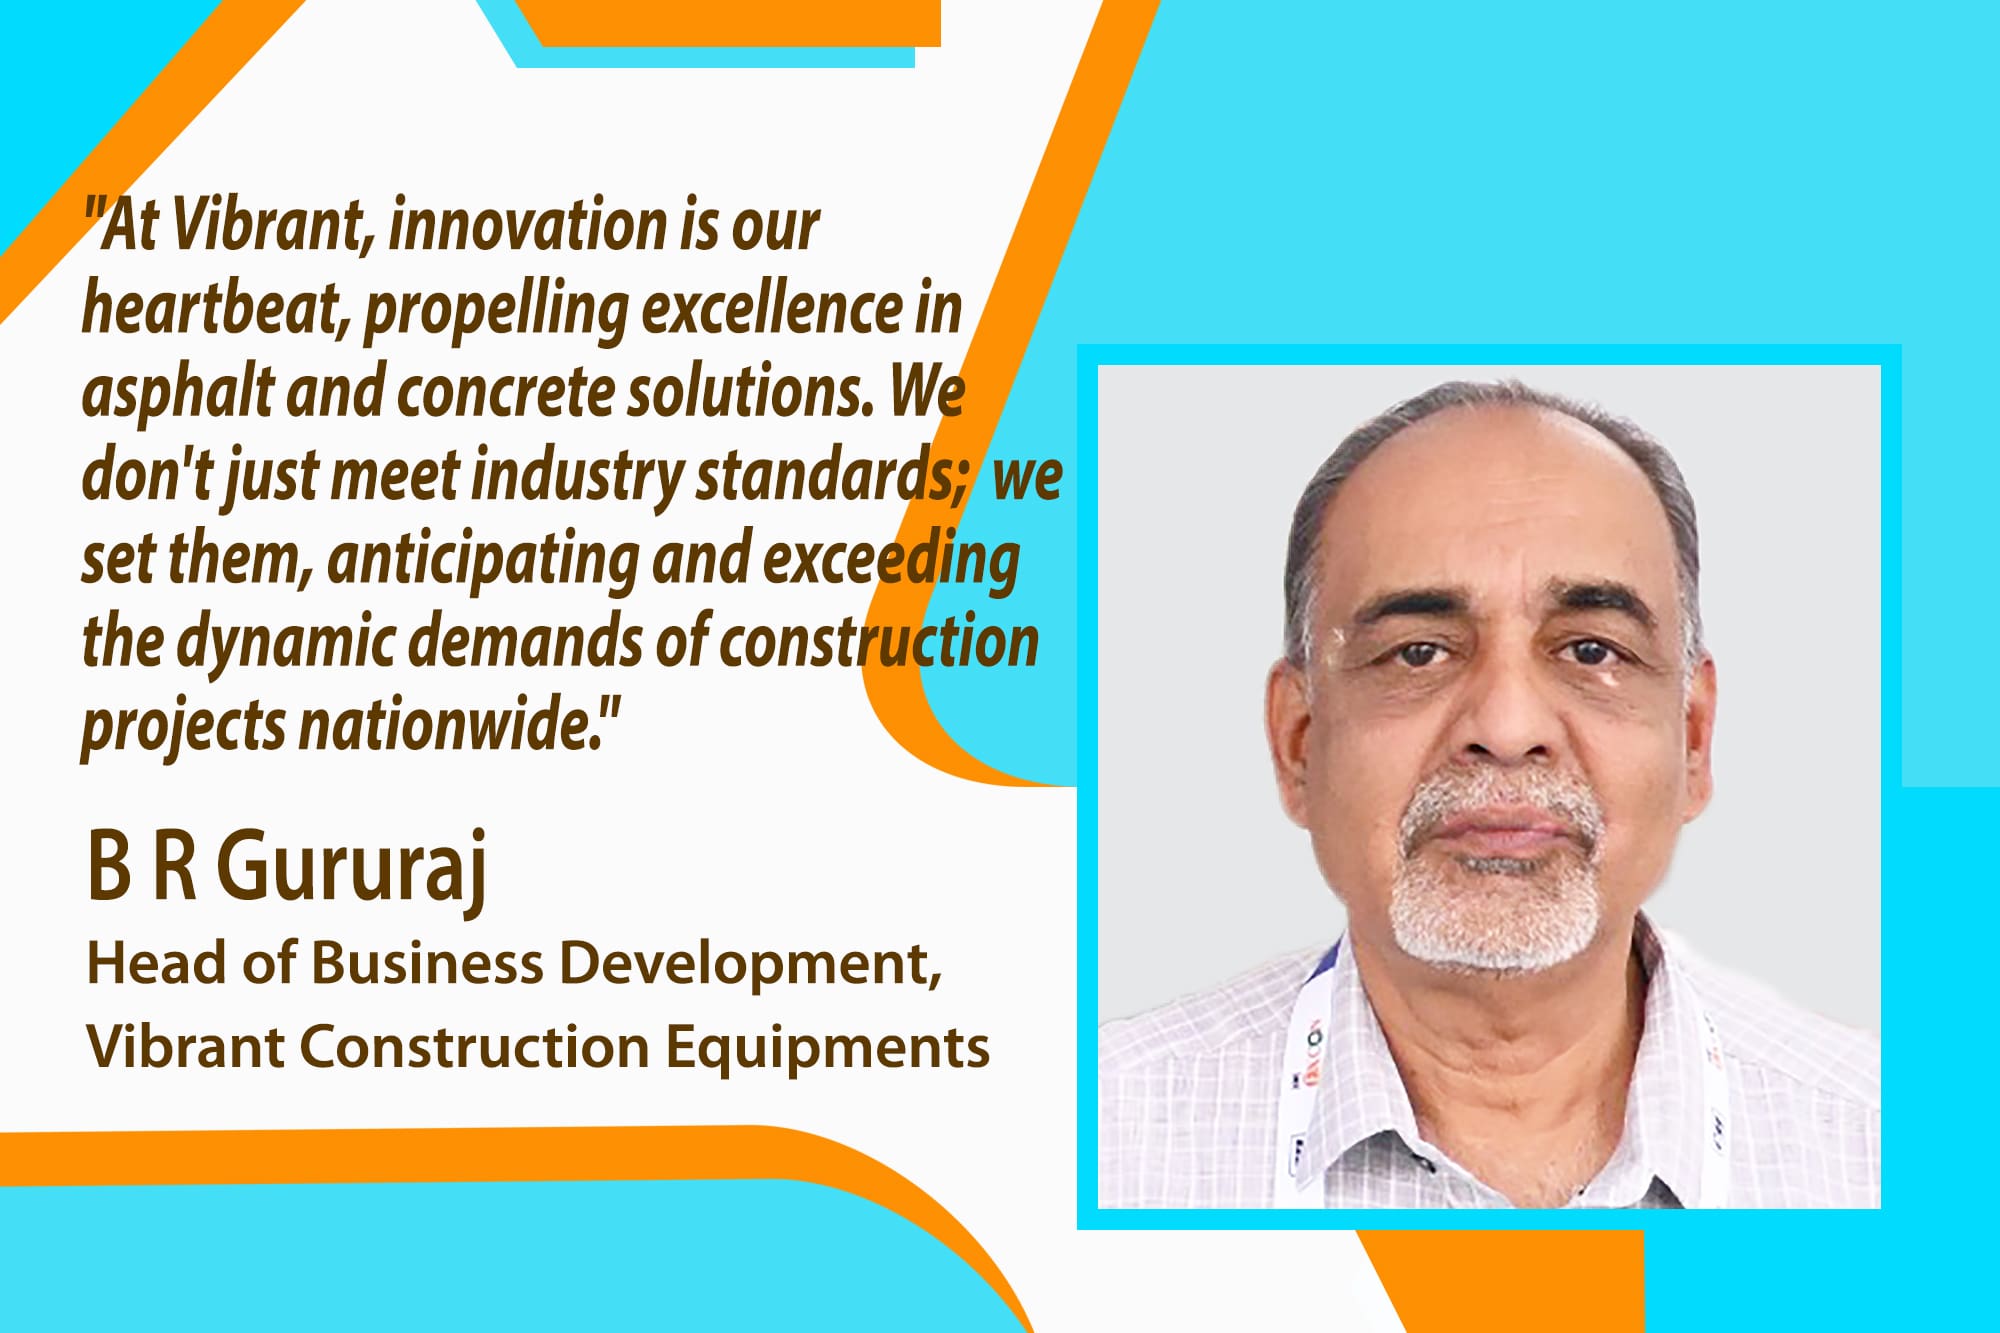 B R Gururaj, Head of Business Development at Vibrant Construction Equipments, sheds light on the company's dynamic approach to innovation, excellence, and the latest advancements in asphalt and concrete solutions.